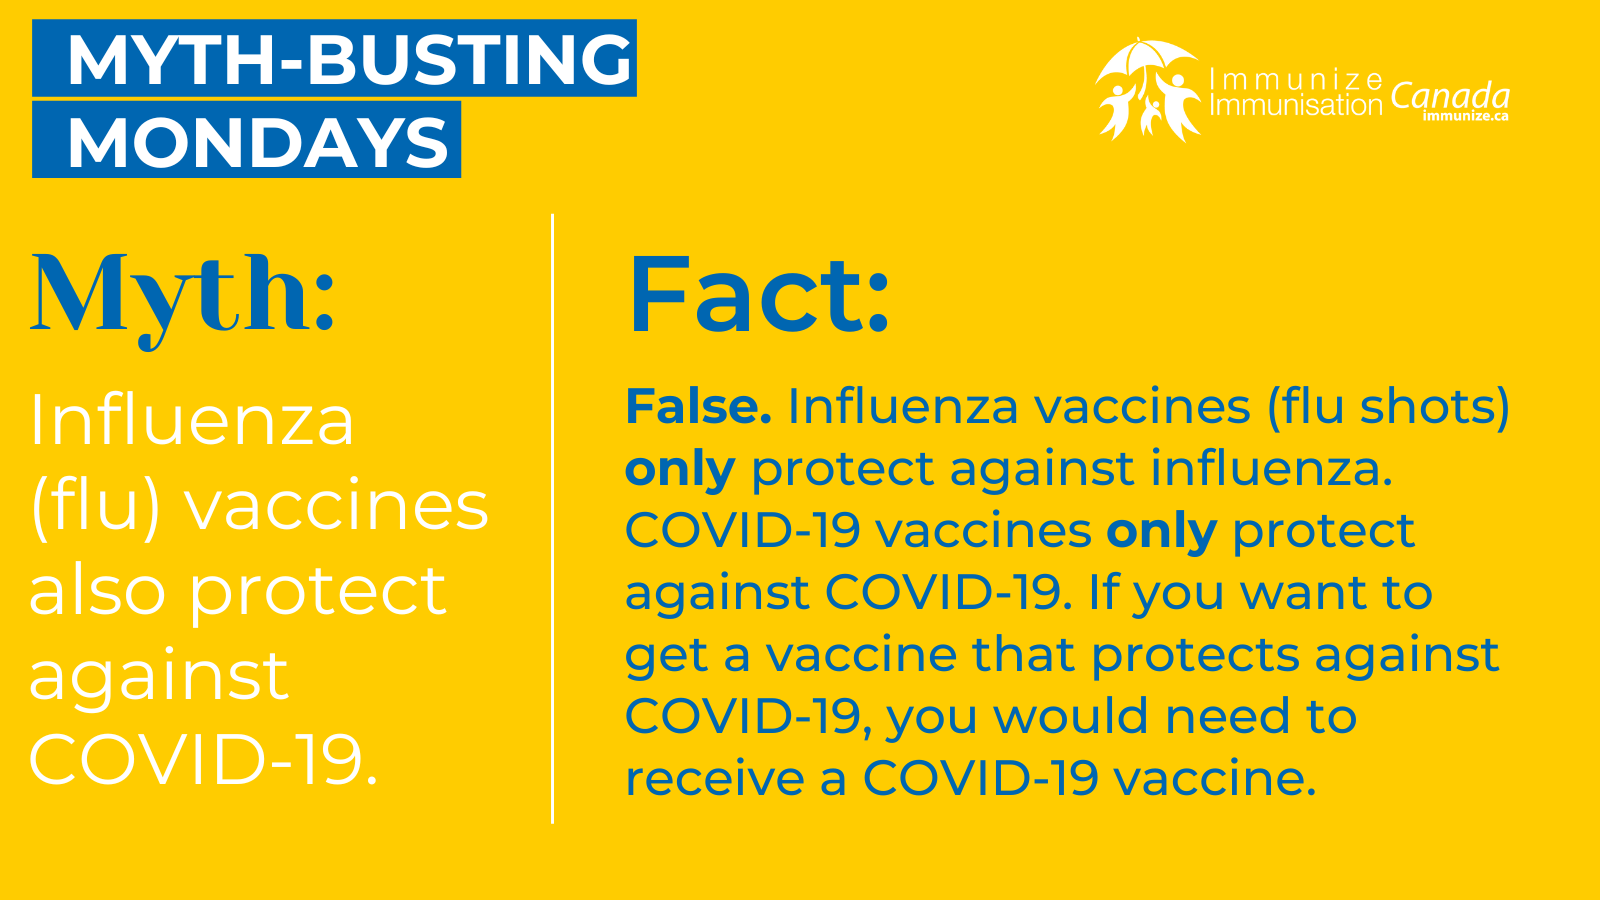 Myth-busting Monday (Twitter/X) - influenza and COVID-19